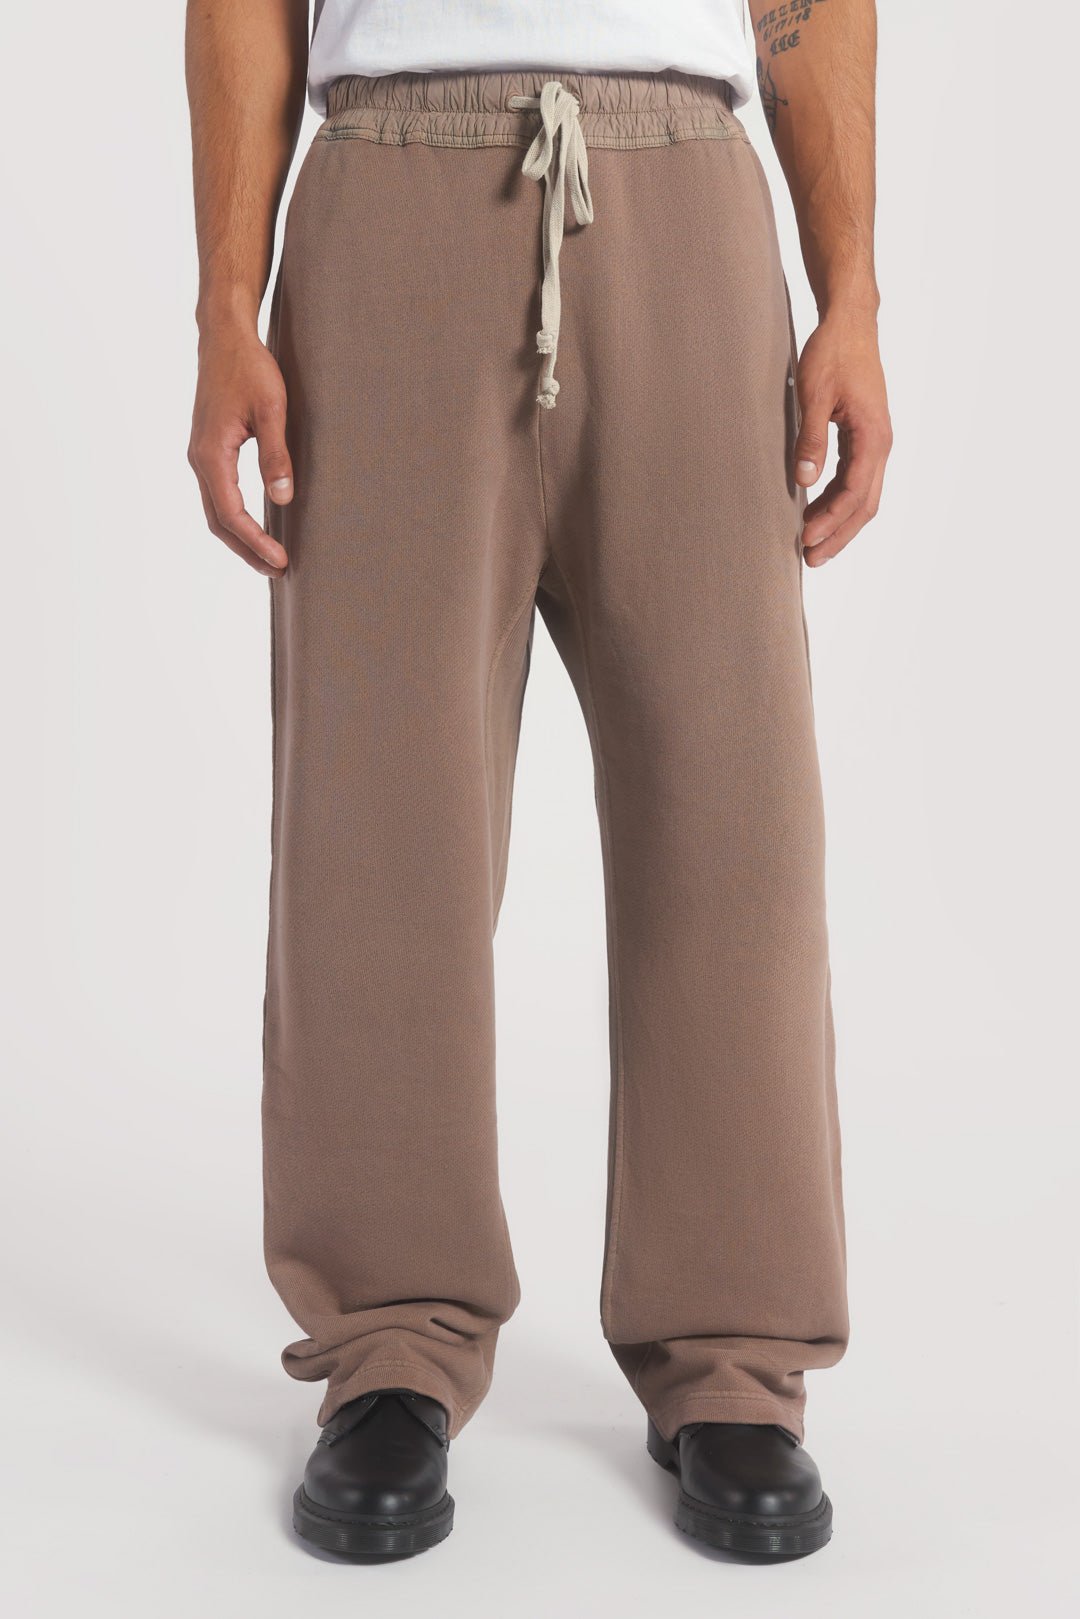 NTRLS Clay Relaxed Joggers